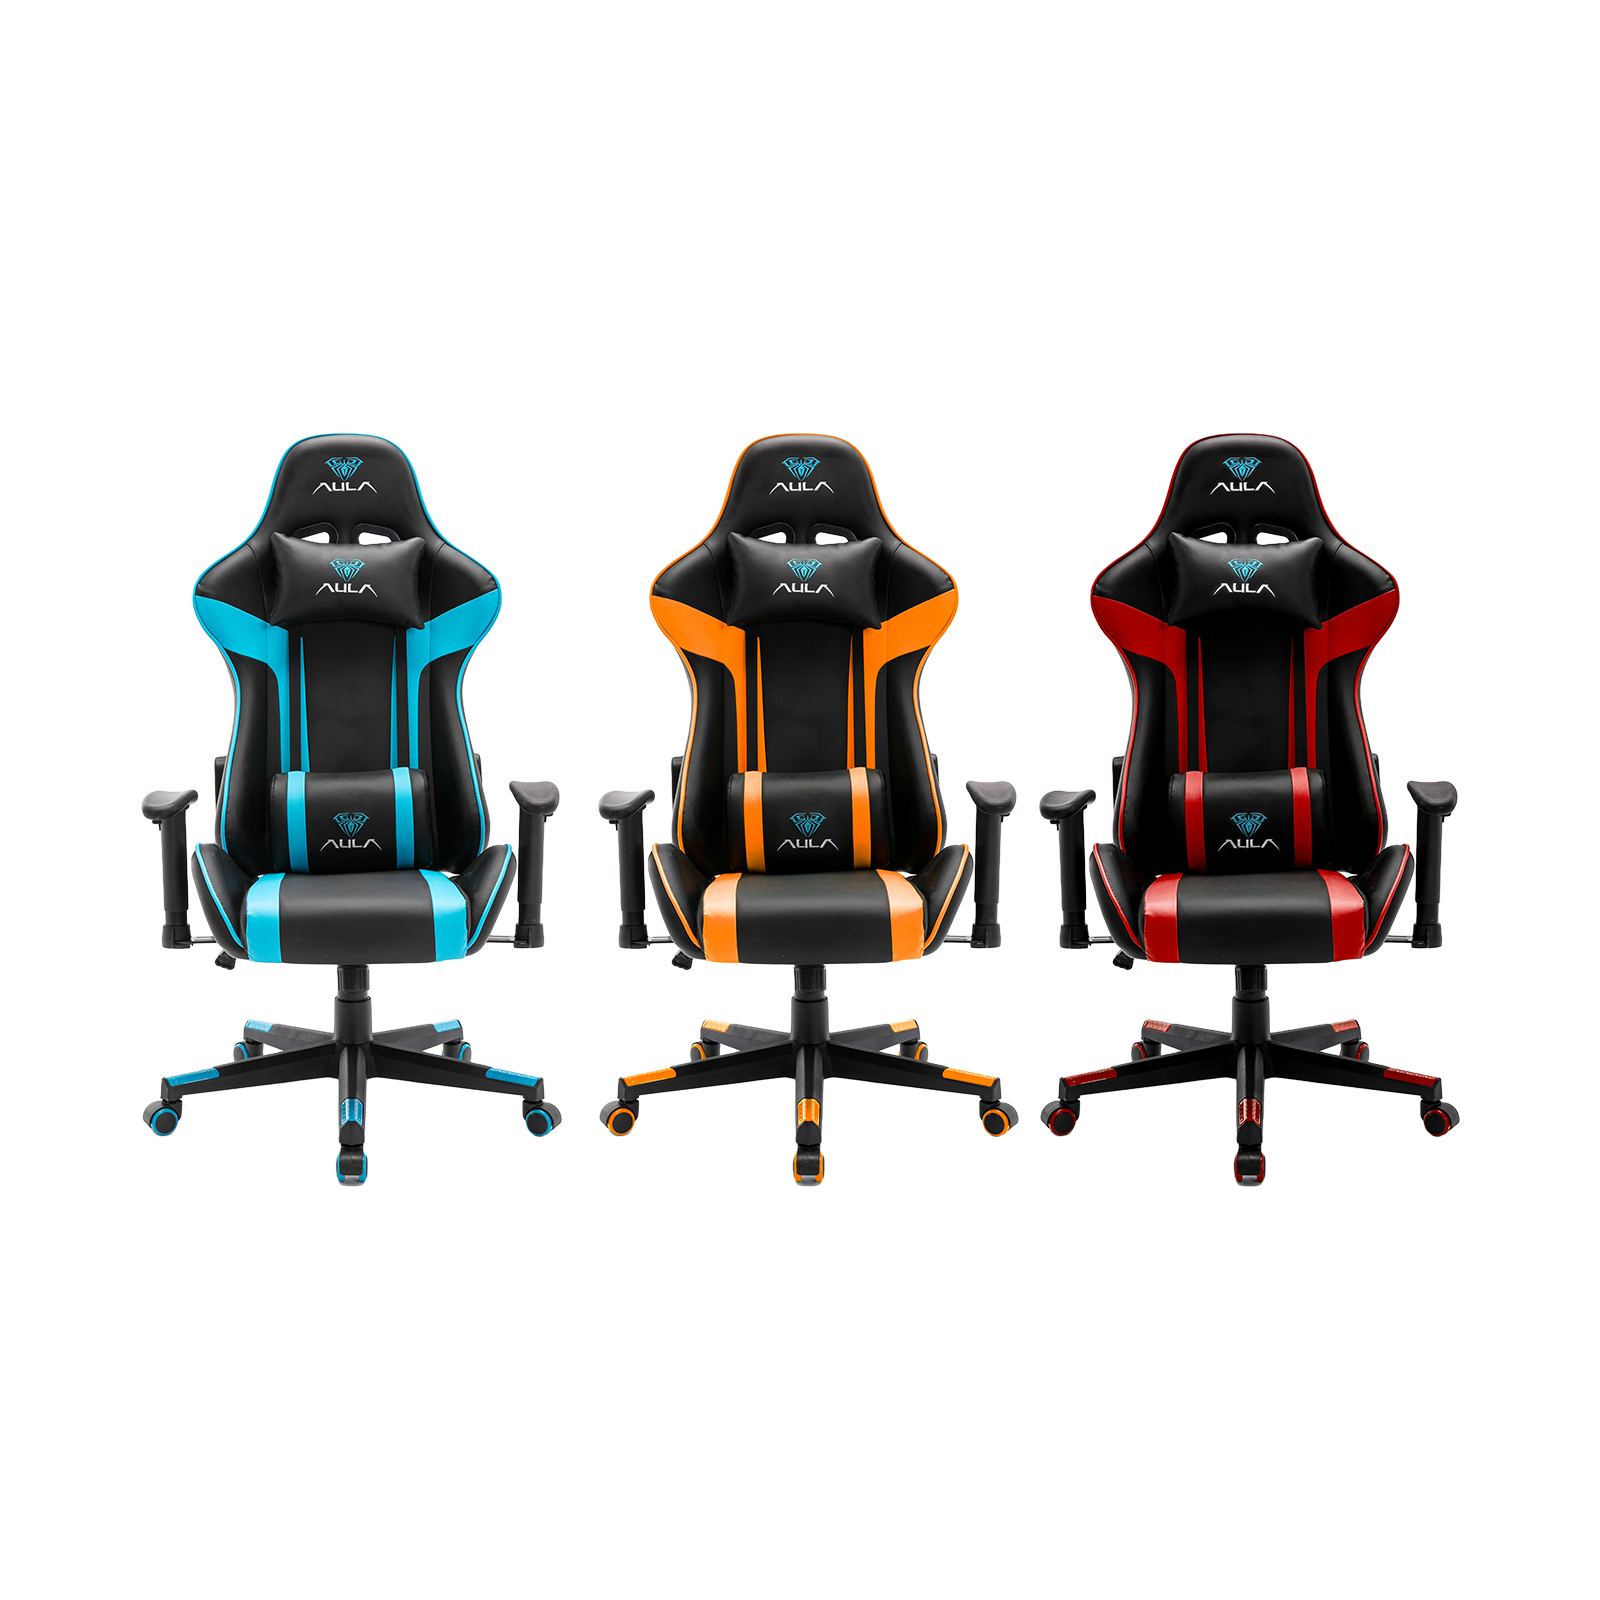 Professional gaming chair – built for comfortable support for long ...